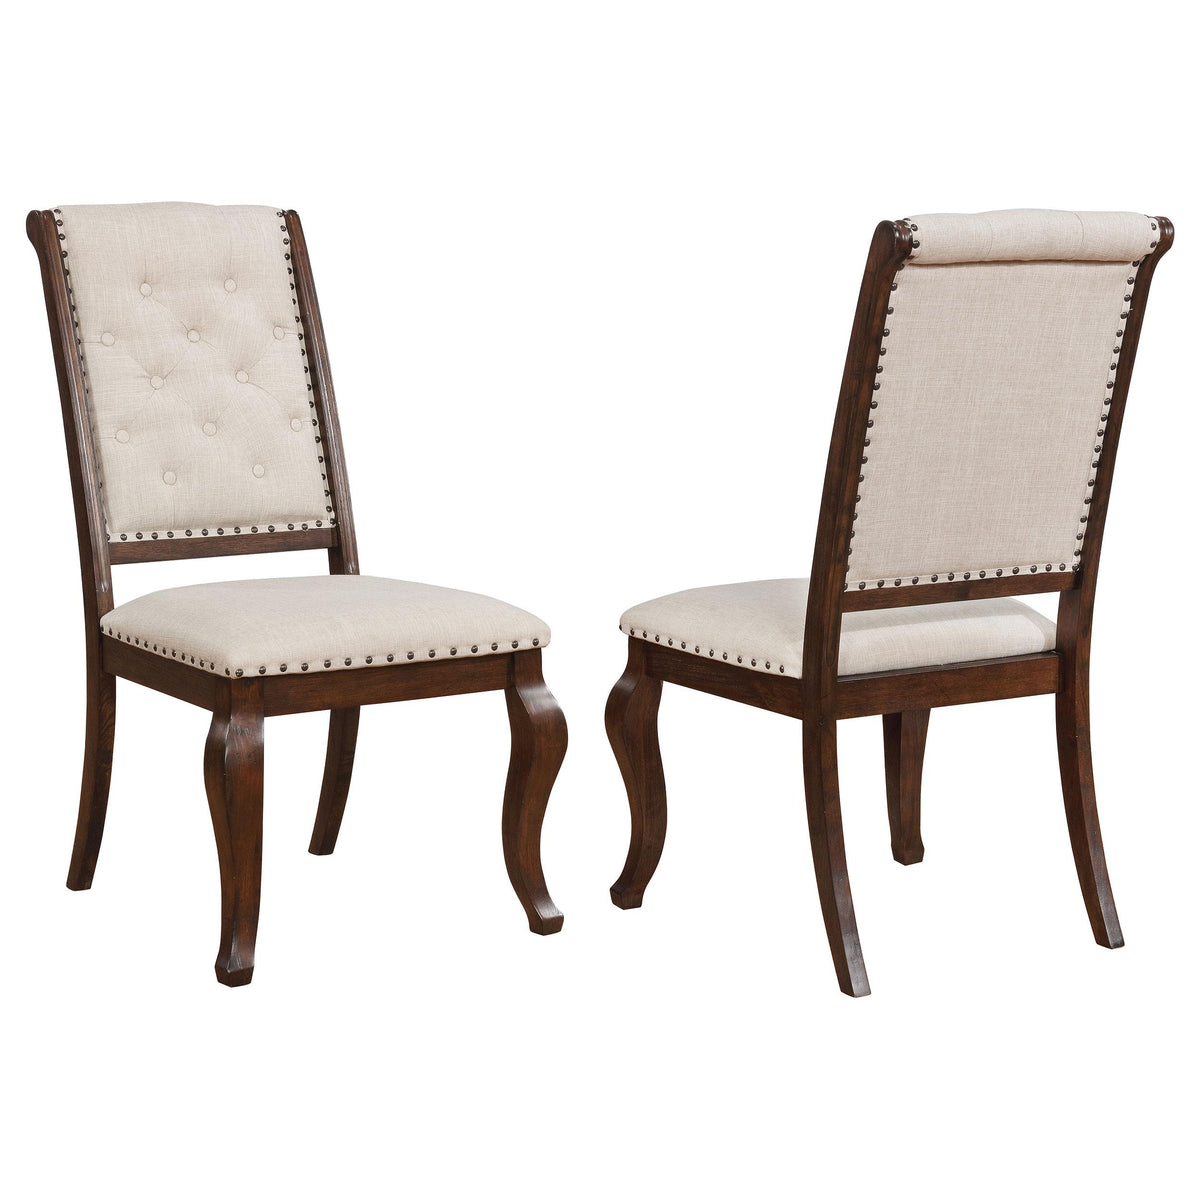 Brockway Tufted Dining Chairs Cream and Antique Java (Set of 2)  Half Price Furniture